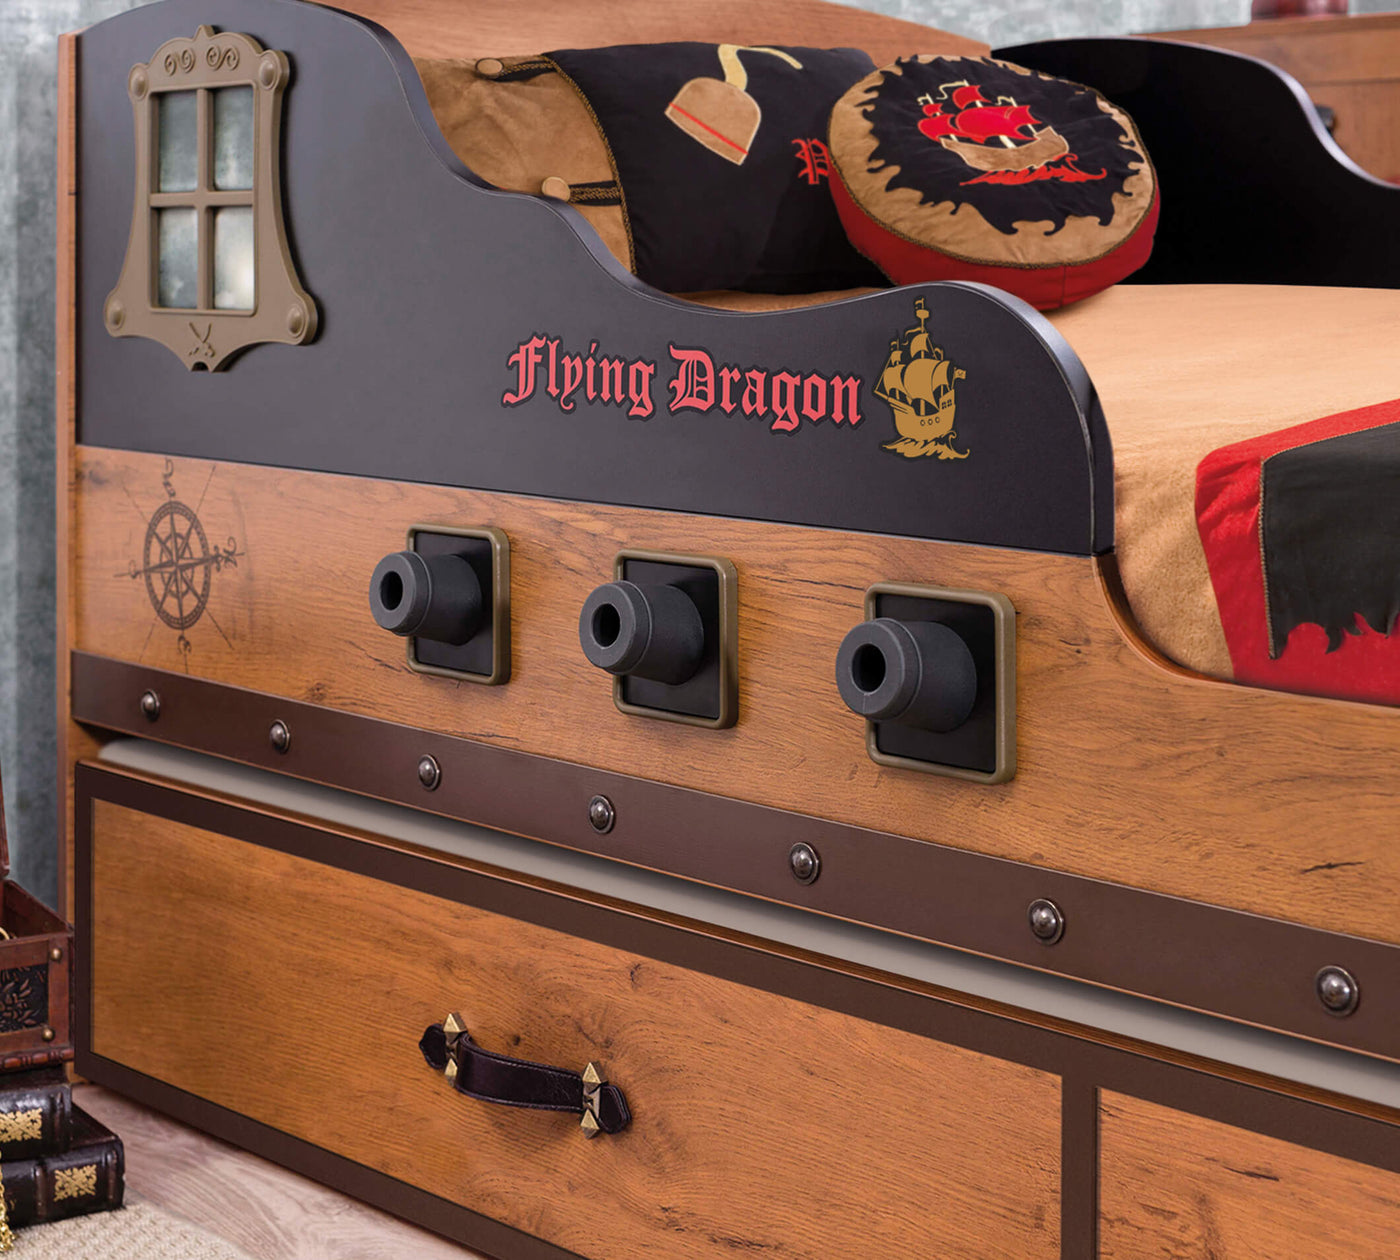 Pirate Ship Bed [S-90x190 Cm] - ON ORDER ONLY